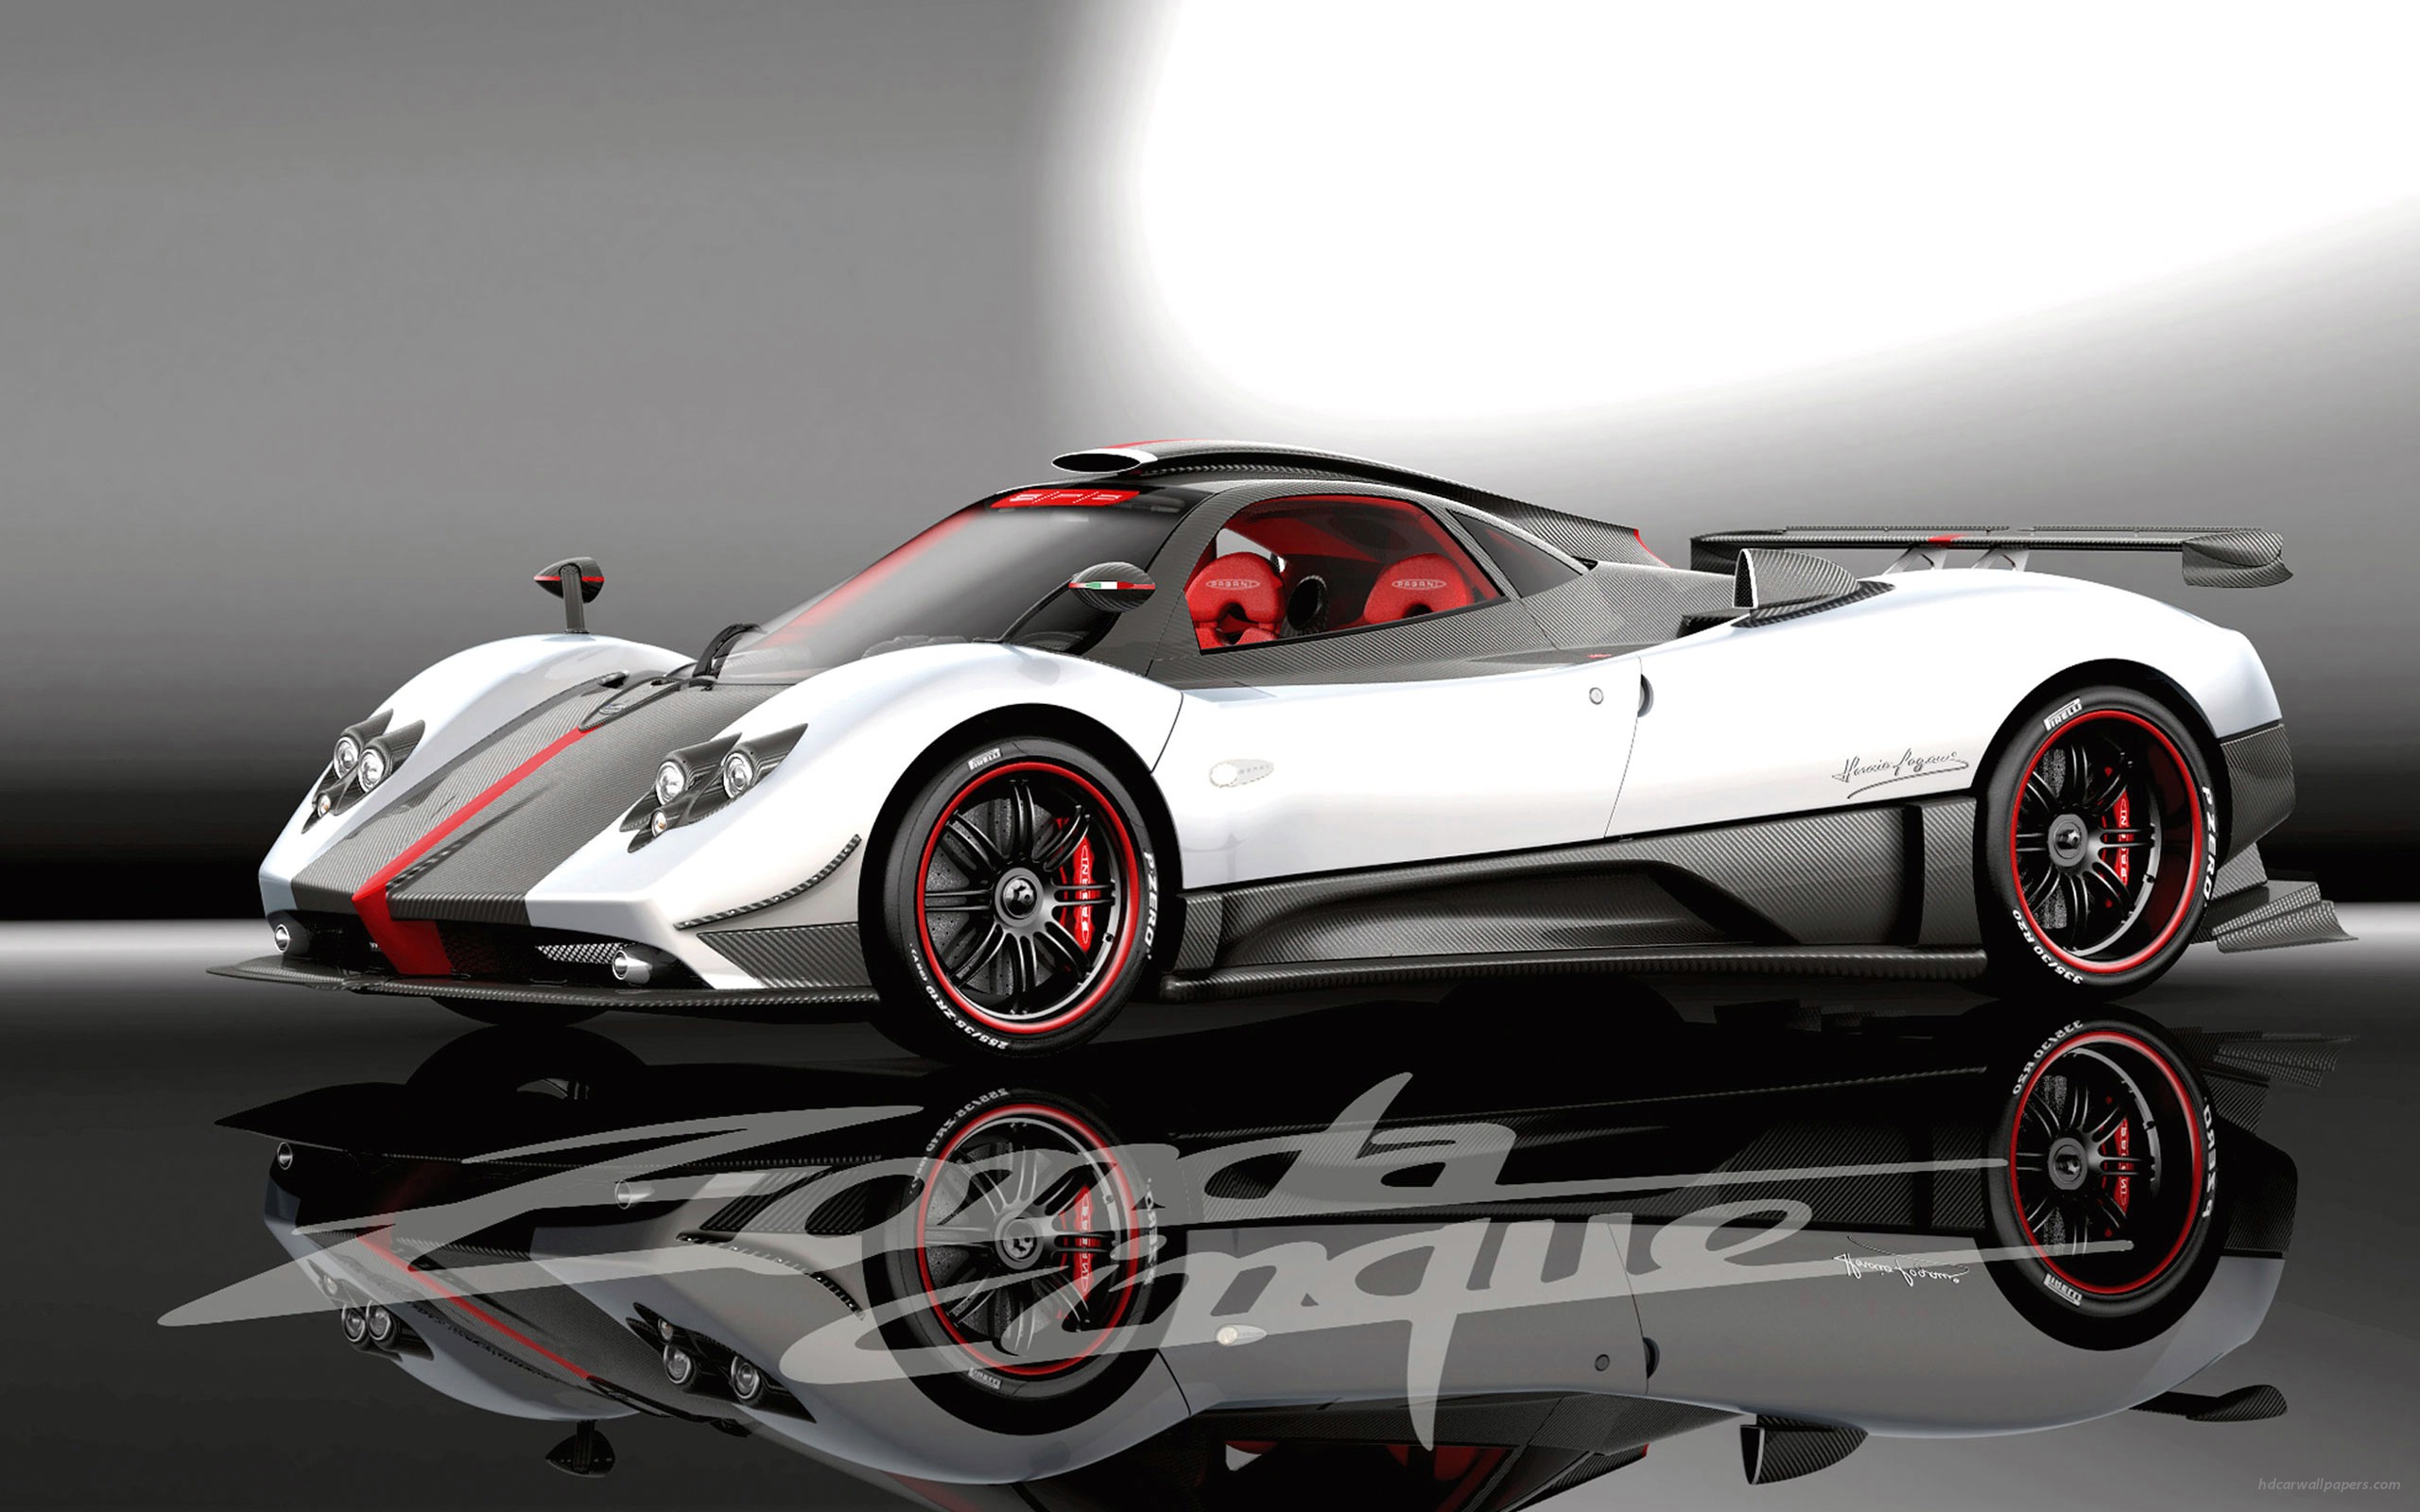 Pagani 4K wallpaper for your desktop or mobile screen free and easy to download